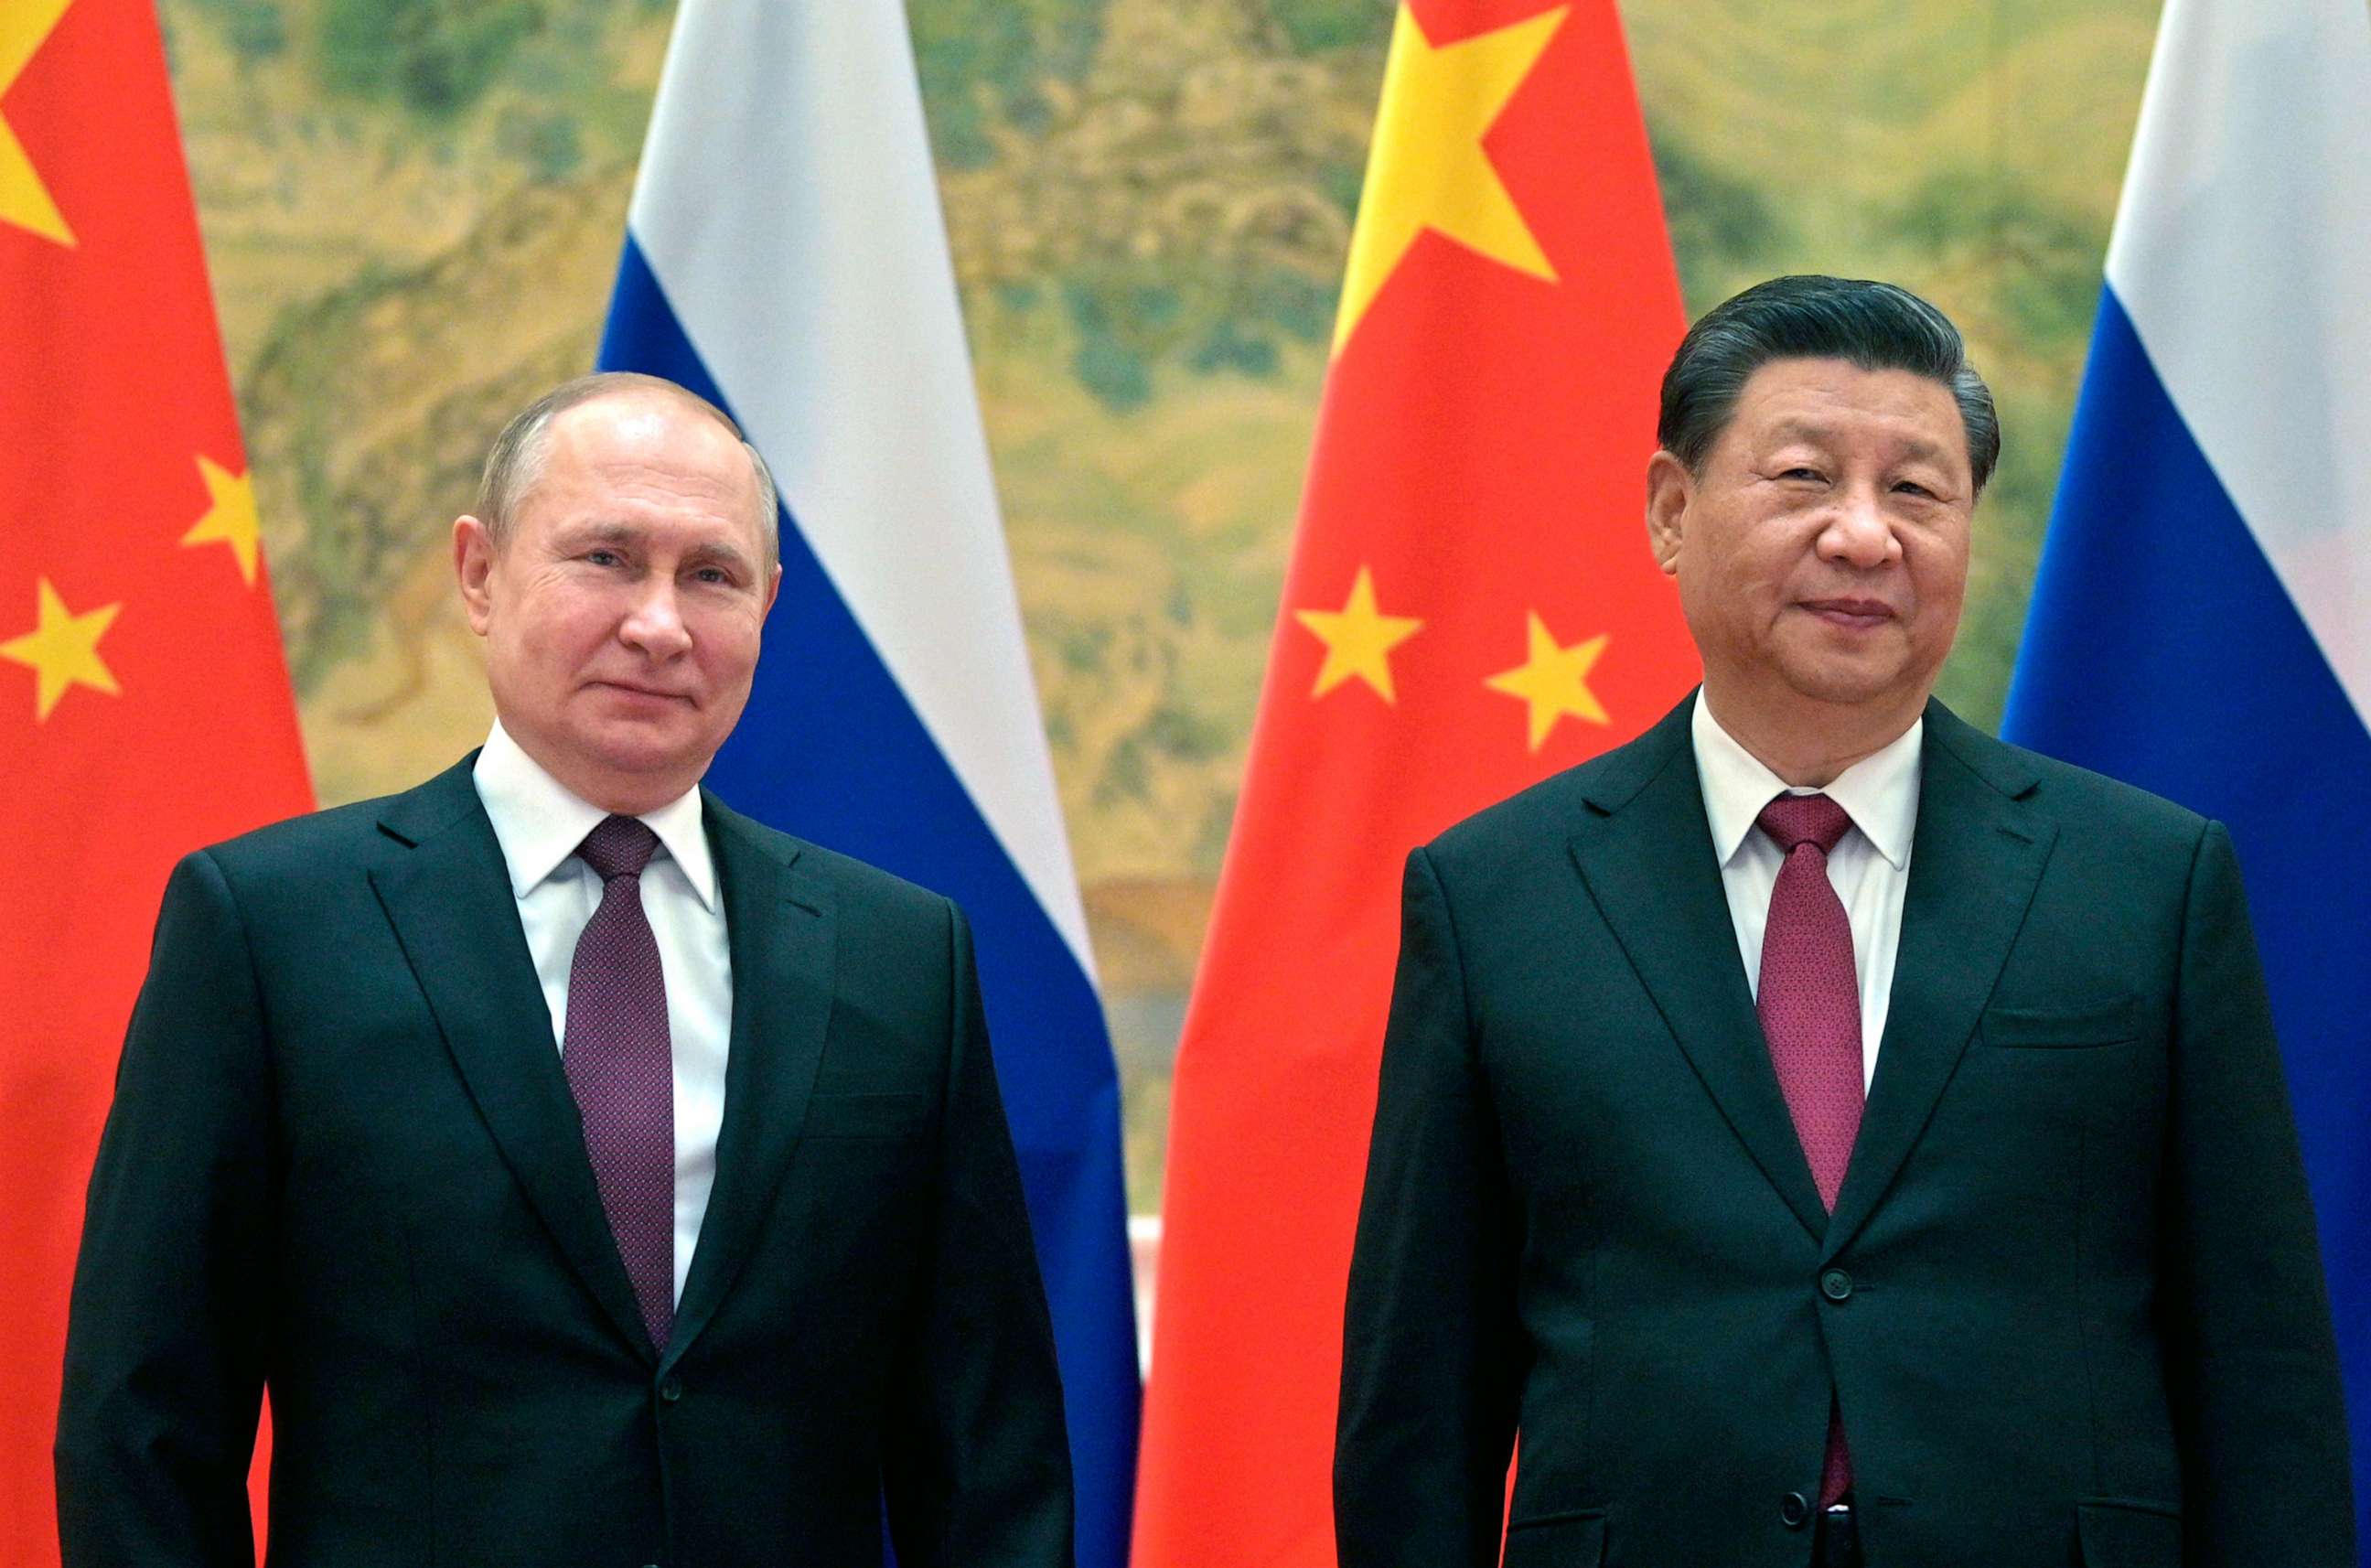 PHOTO: Chinese President Xi Jinping, right, and Russian President Vladimir Putin pose for a photo prior to their talks in Beijing, Feb. 4, 2022.